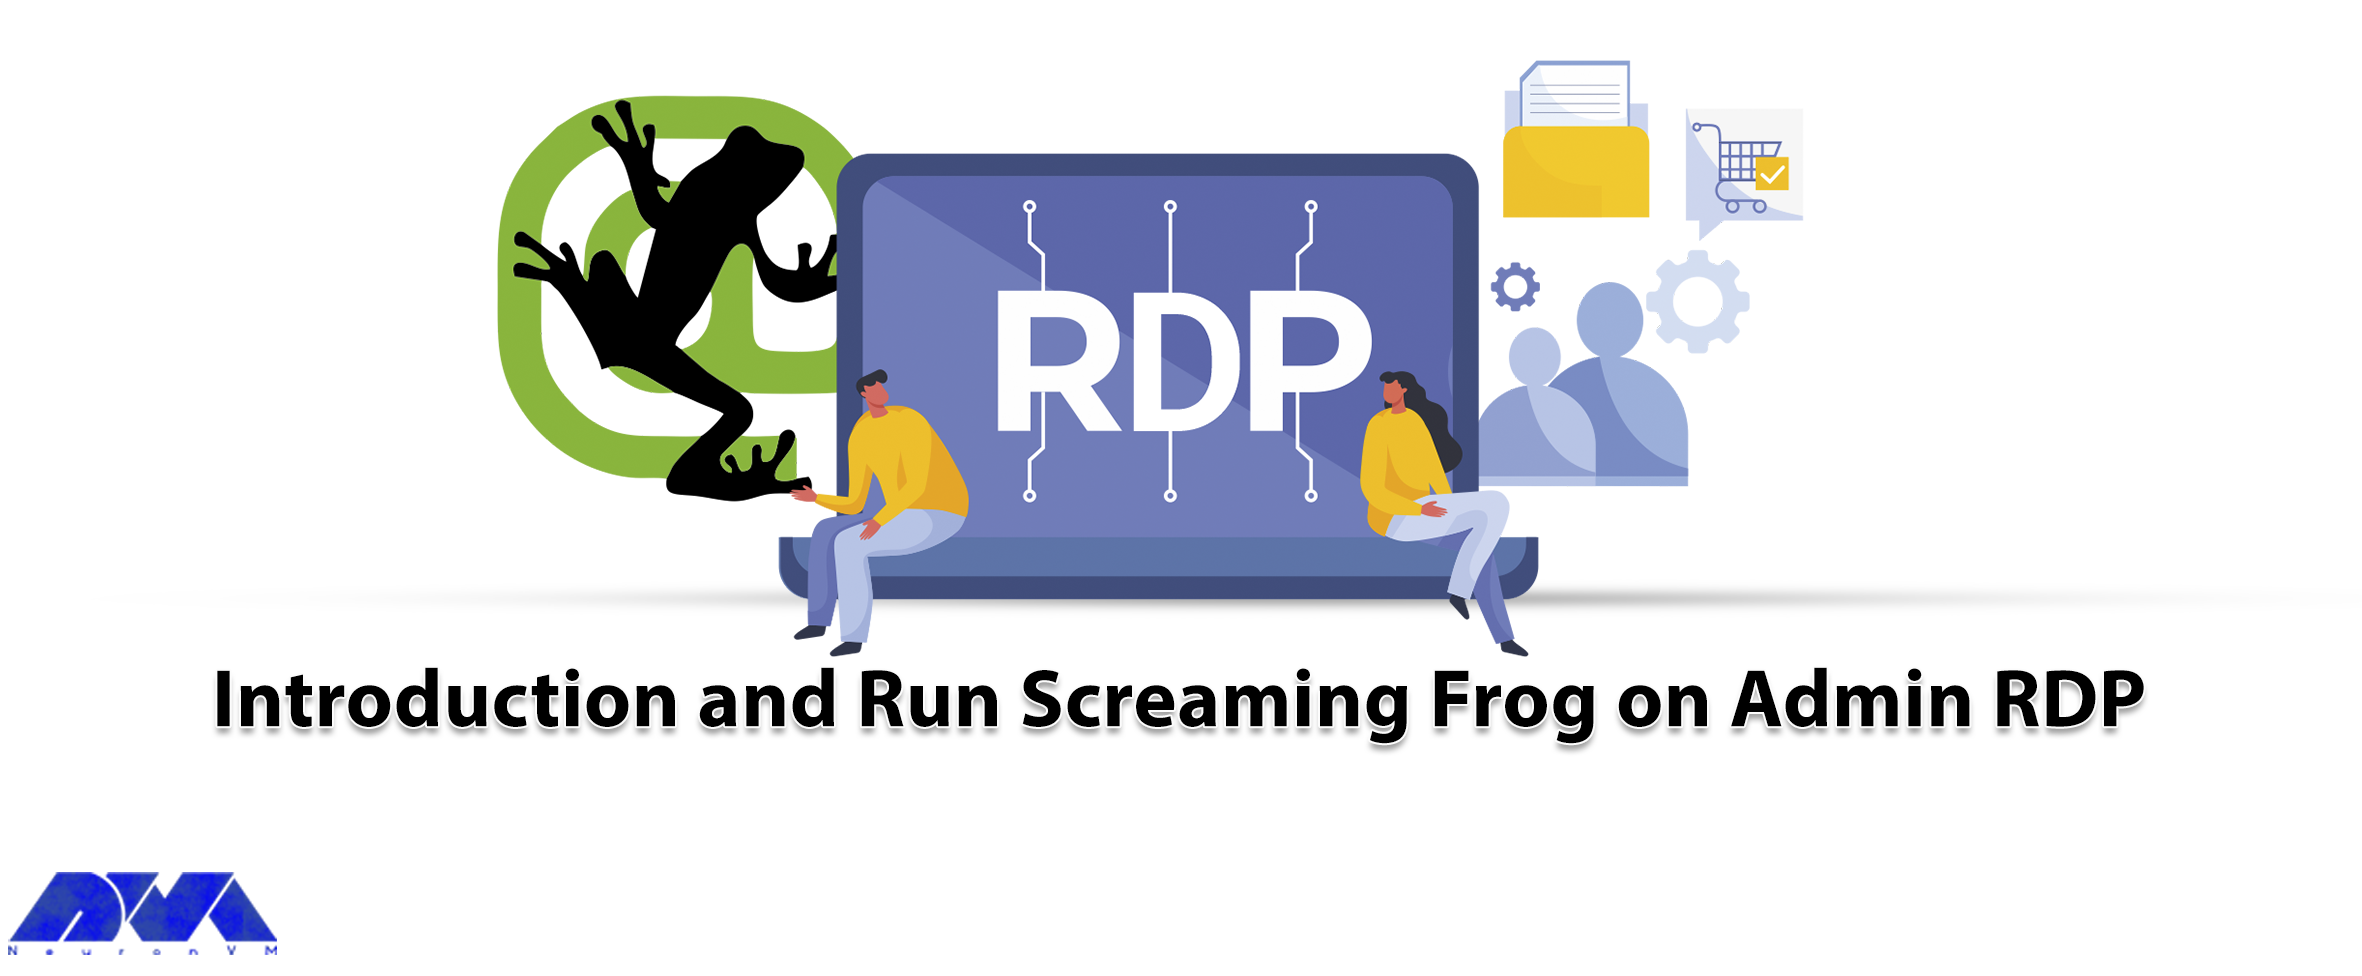 Introduction and Run Screaming Frog on Admin RDP